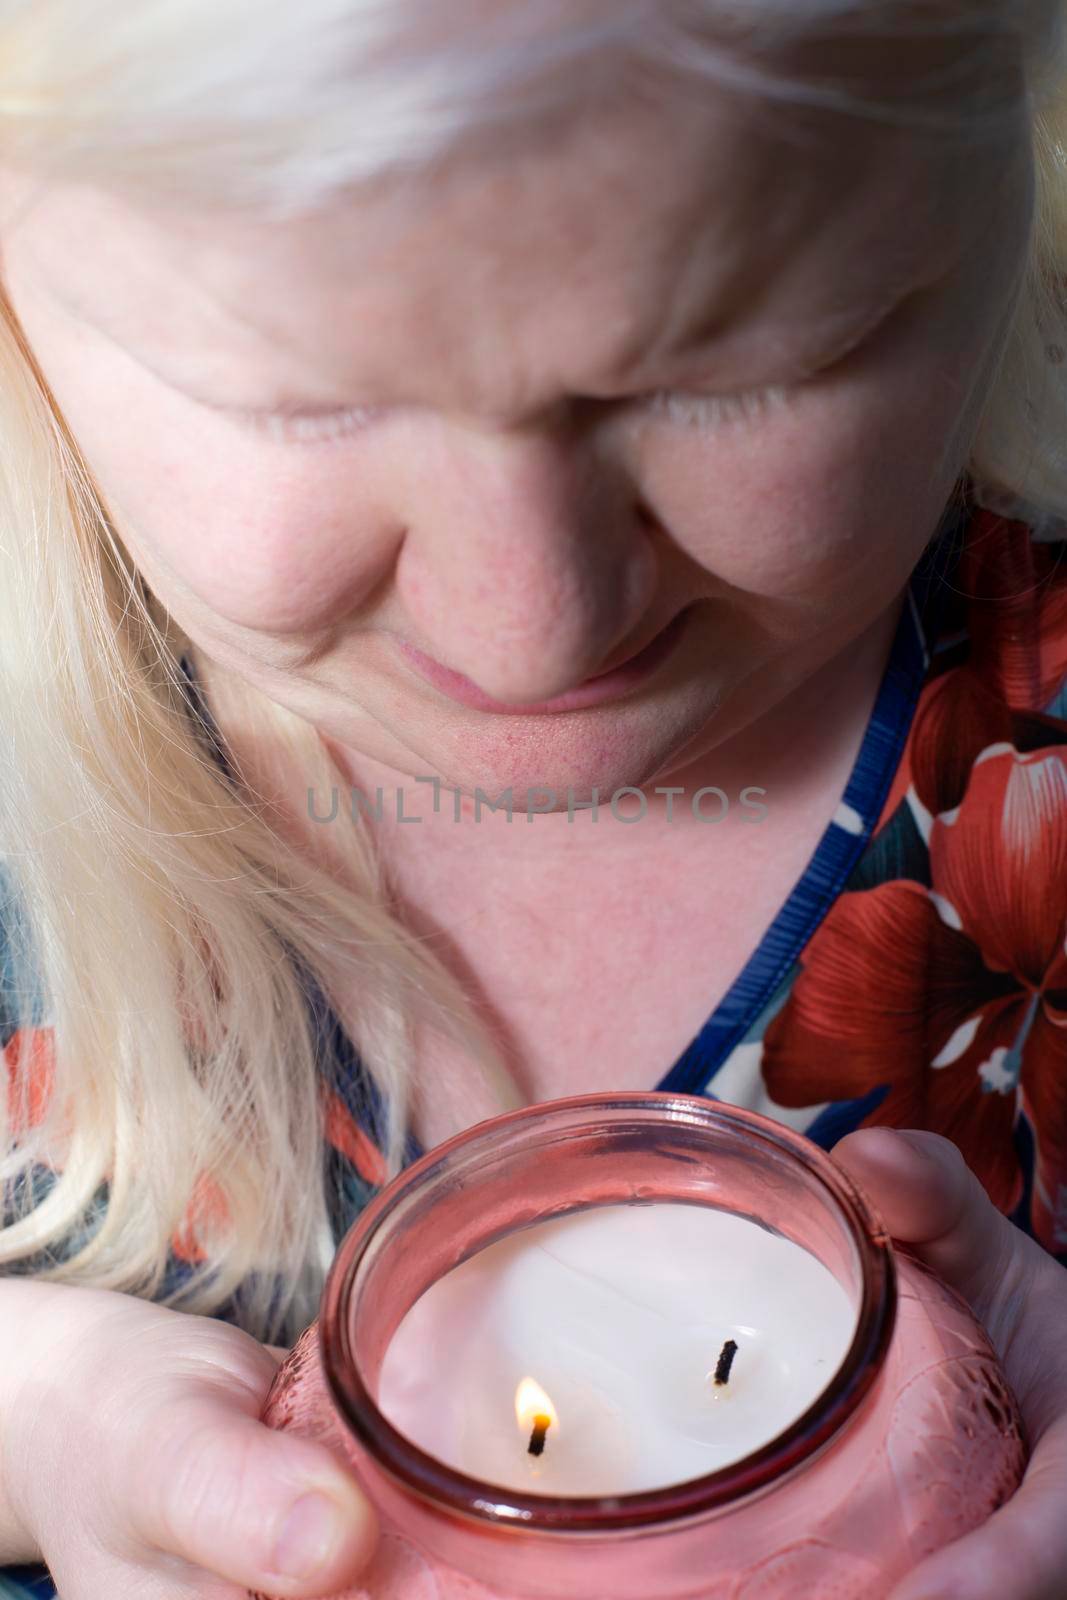 Albino woman enjoying the scent of a lit peach-colored candle